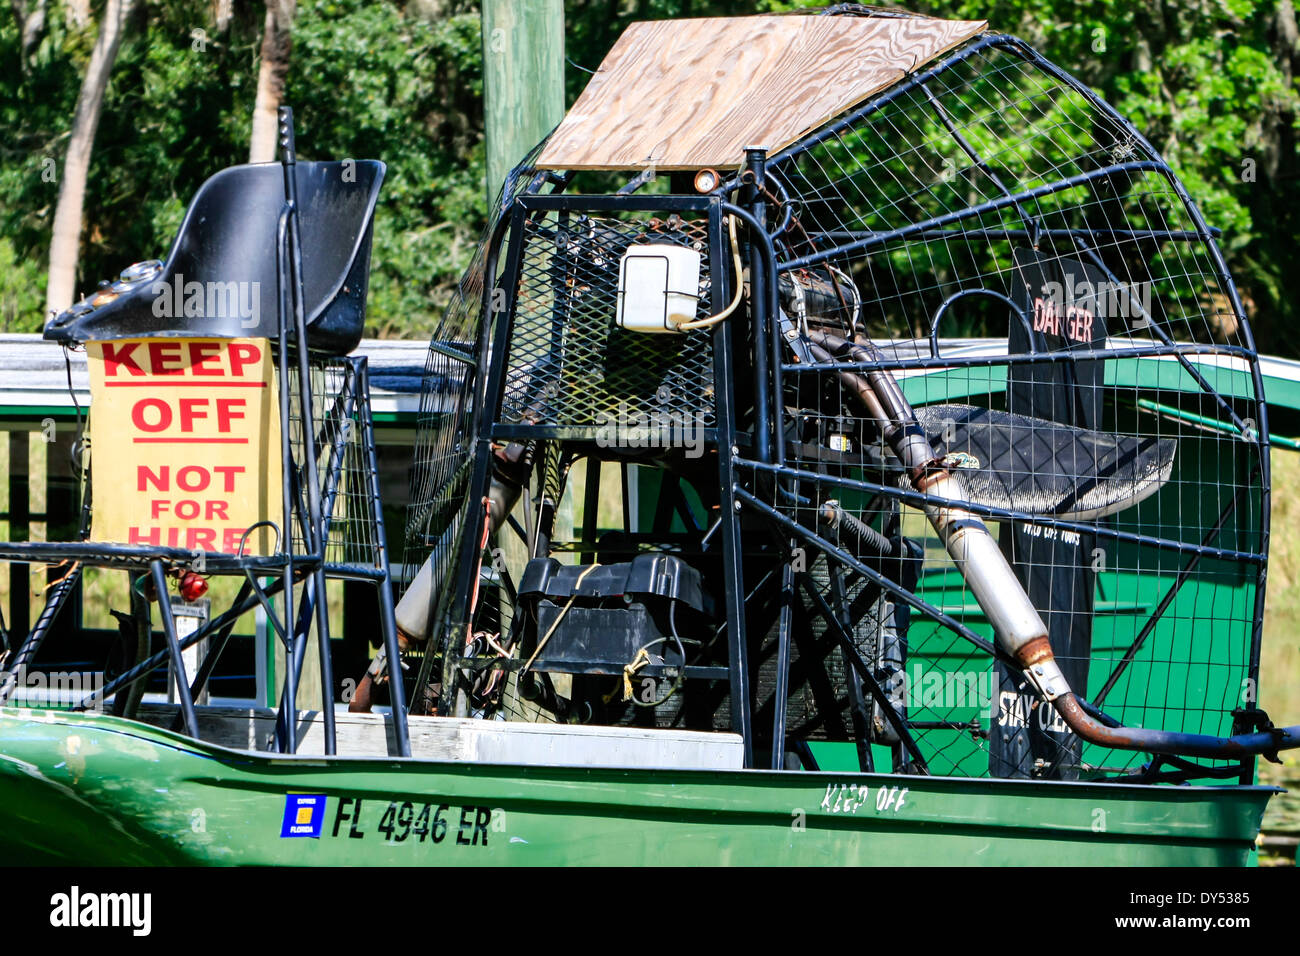 Florida Air Boat used in the Everglades because of it's flat bottom seen at the Ranger's Station in Myakka State Park FL Stock Photo